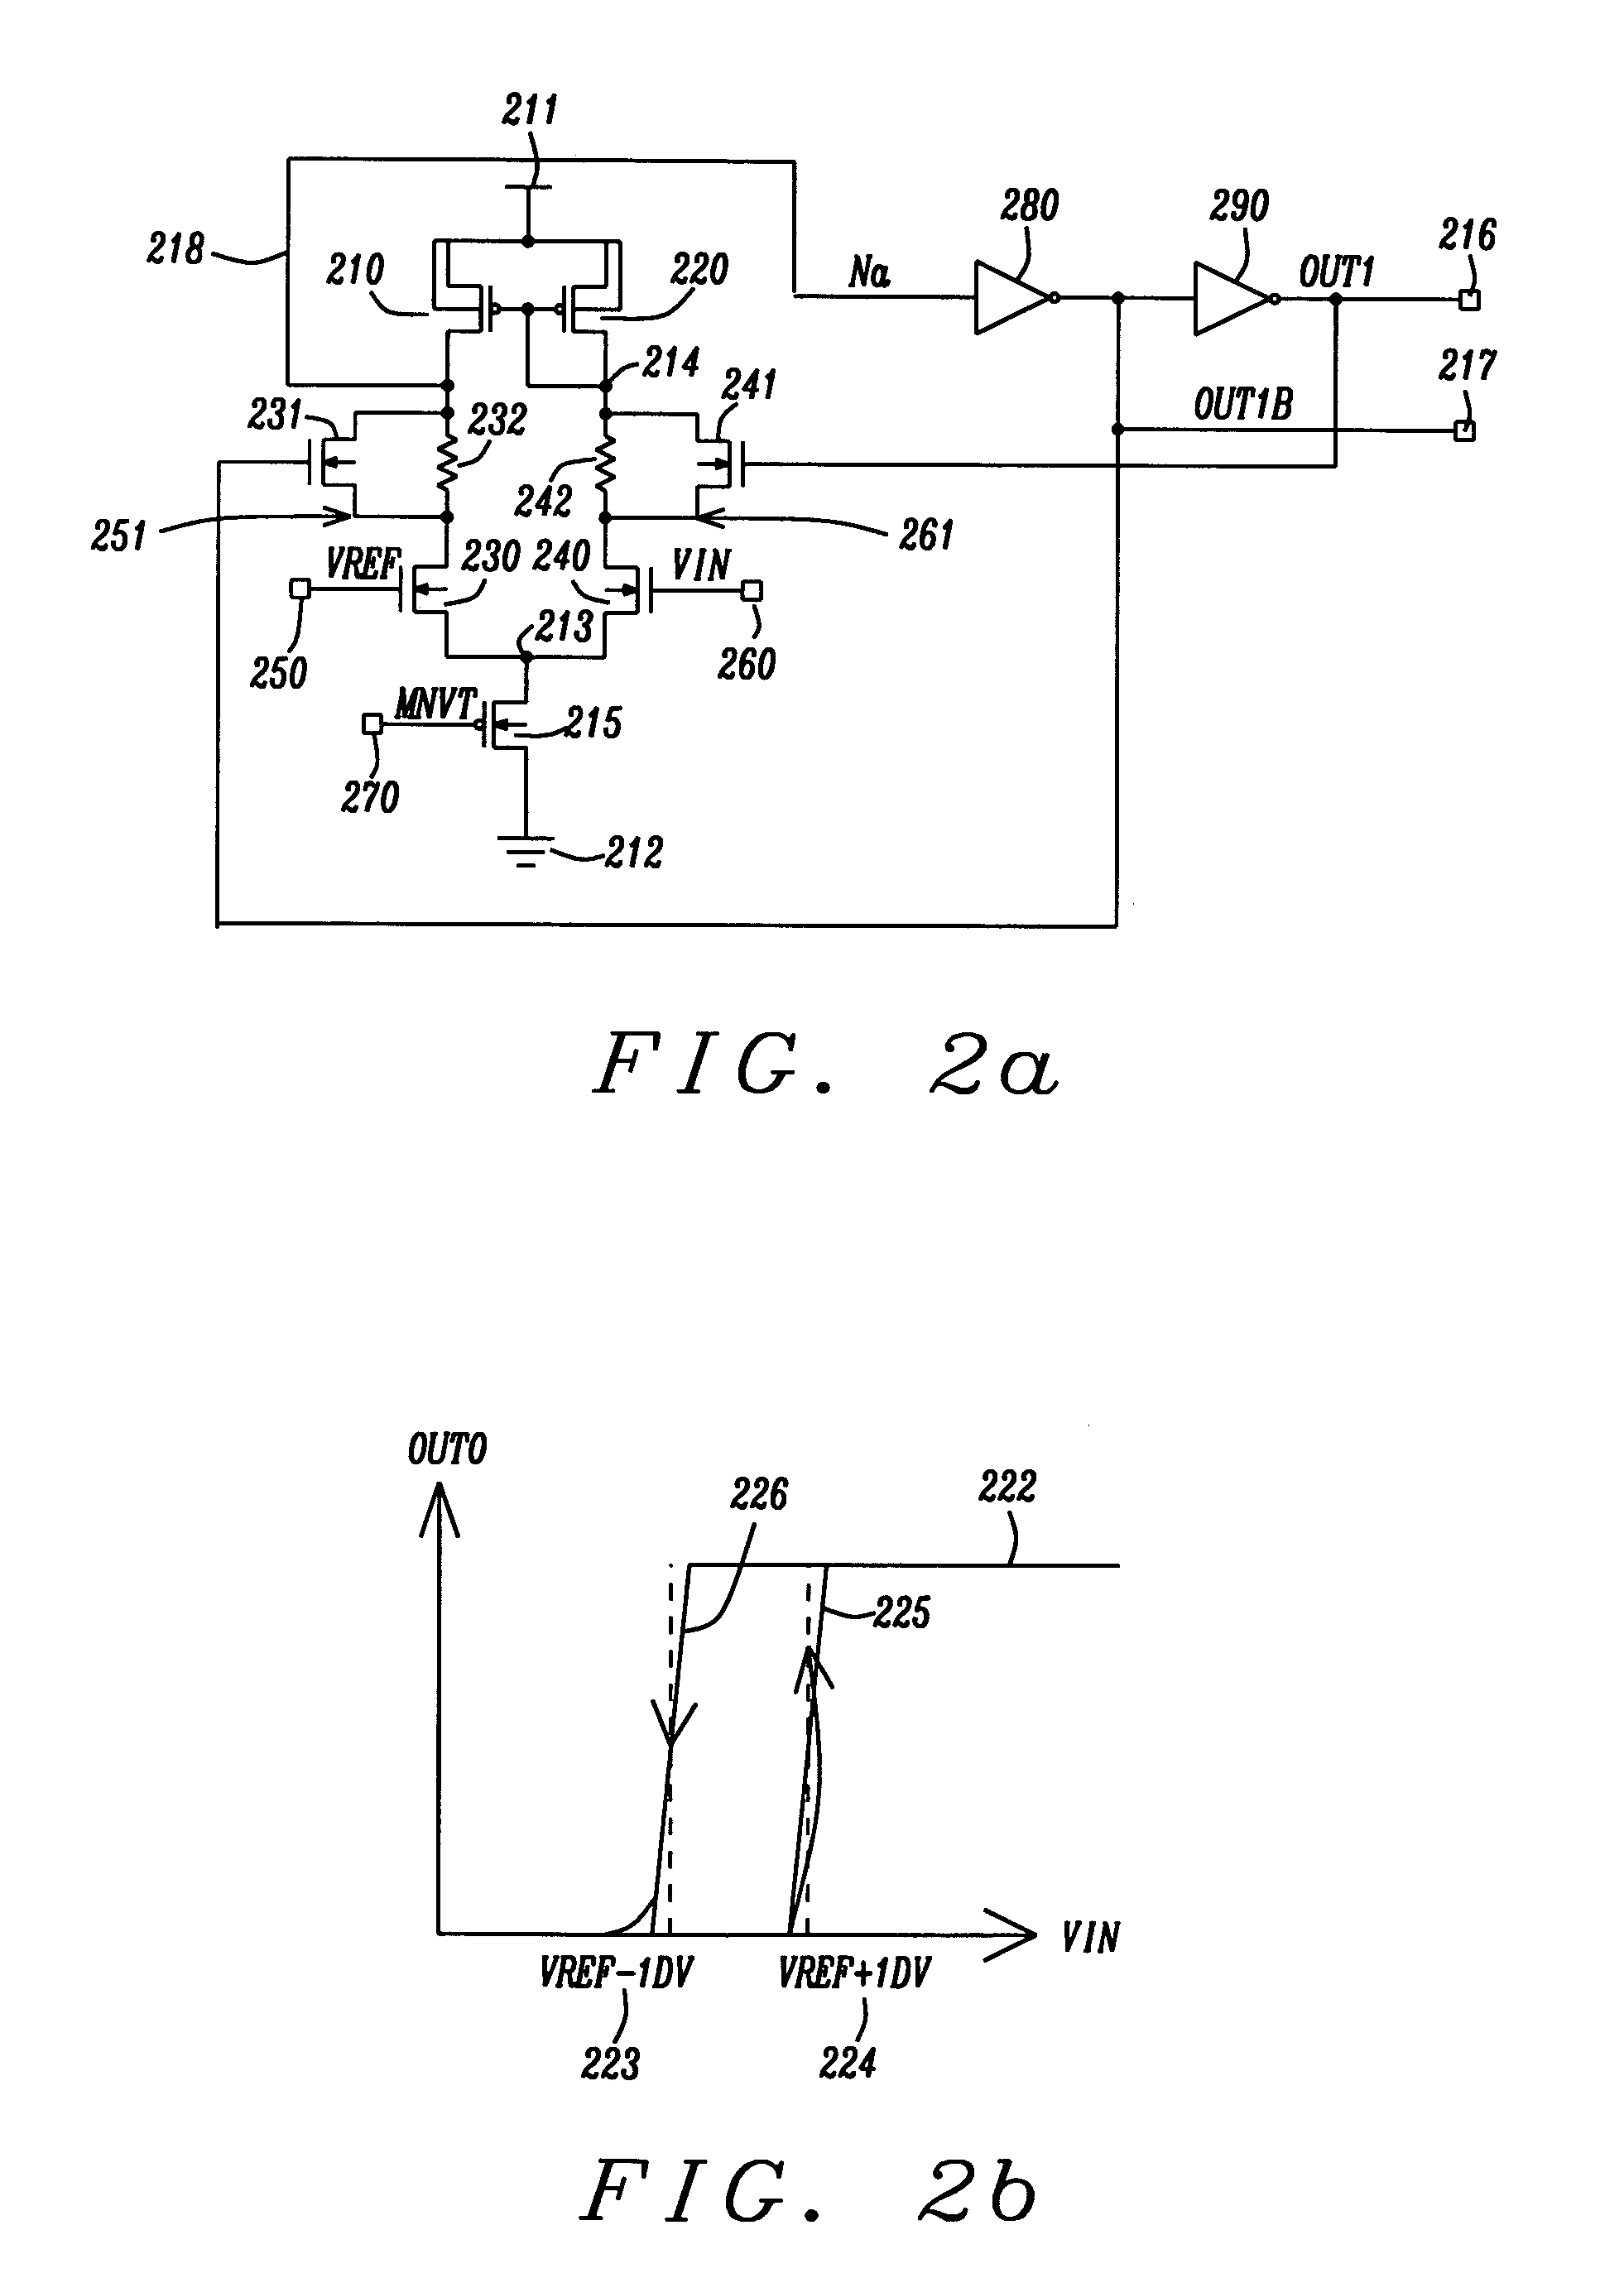 Comparator circuit with Schmitt trigger hysteresis character